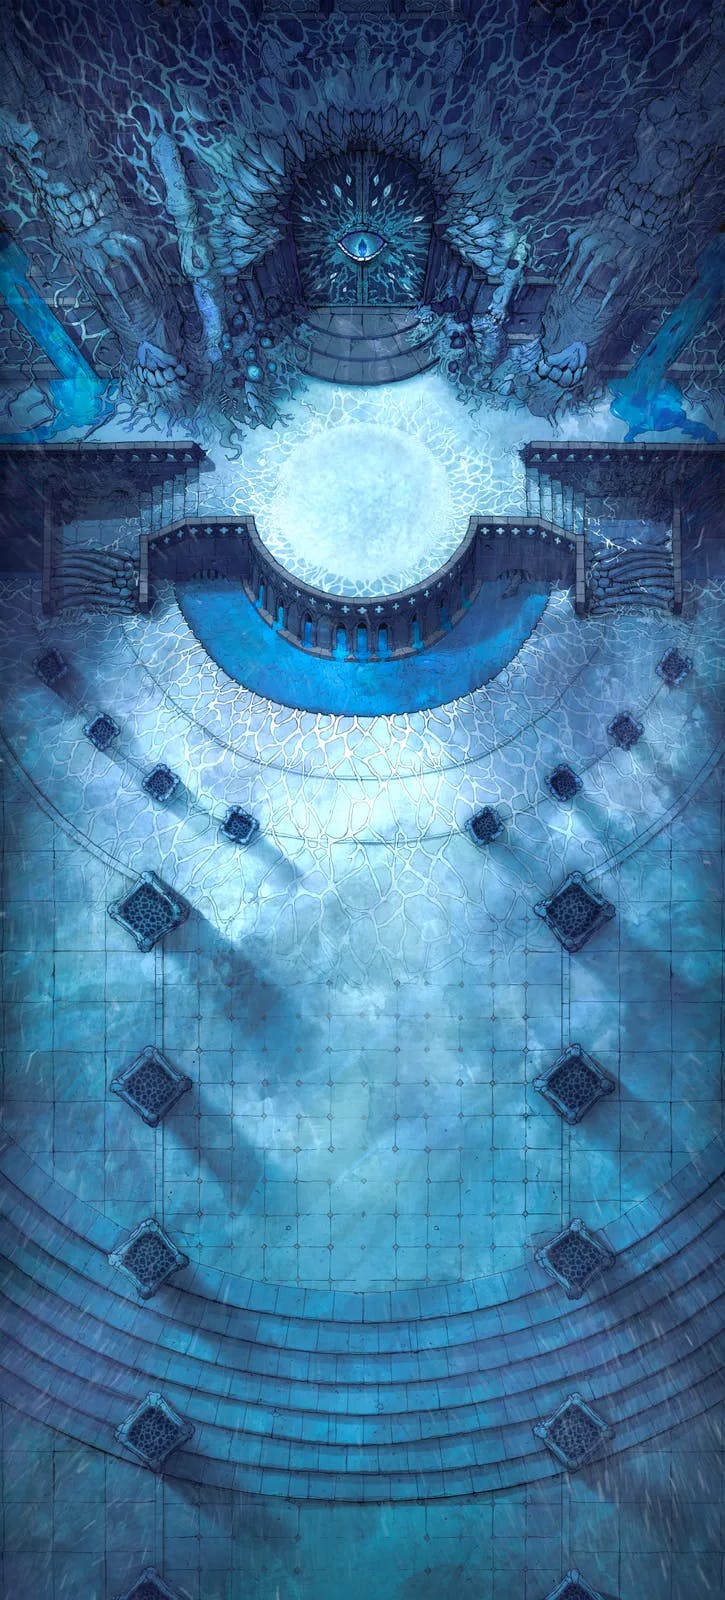 Nightmare Dragon Lair map, Cold Ice variant thumbnail